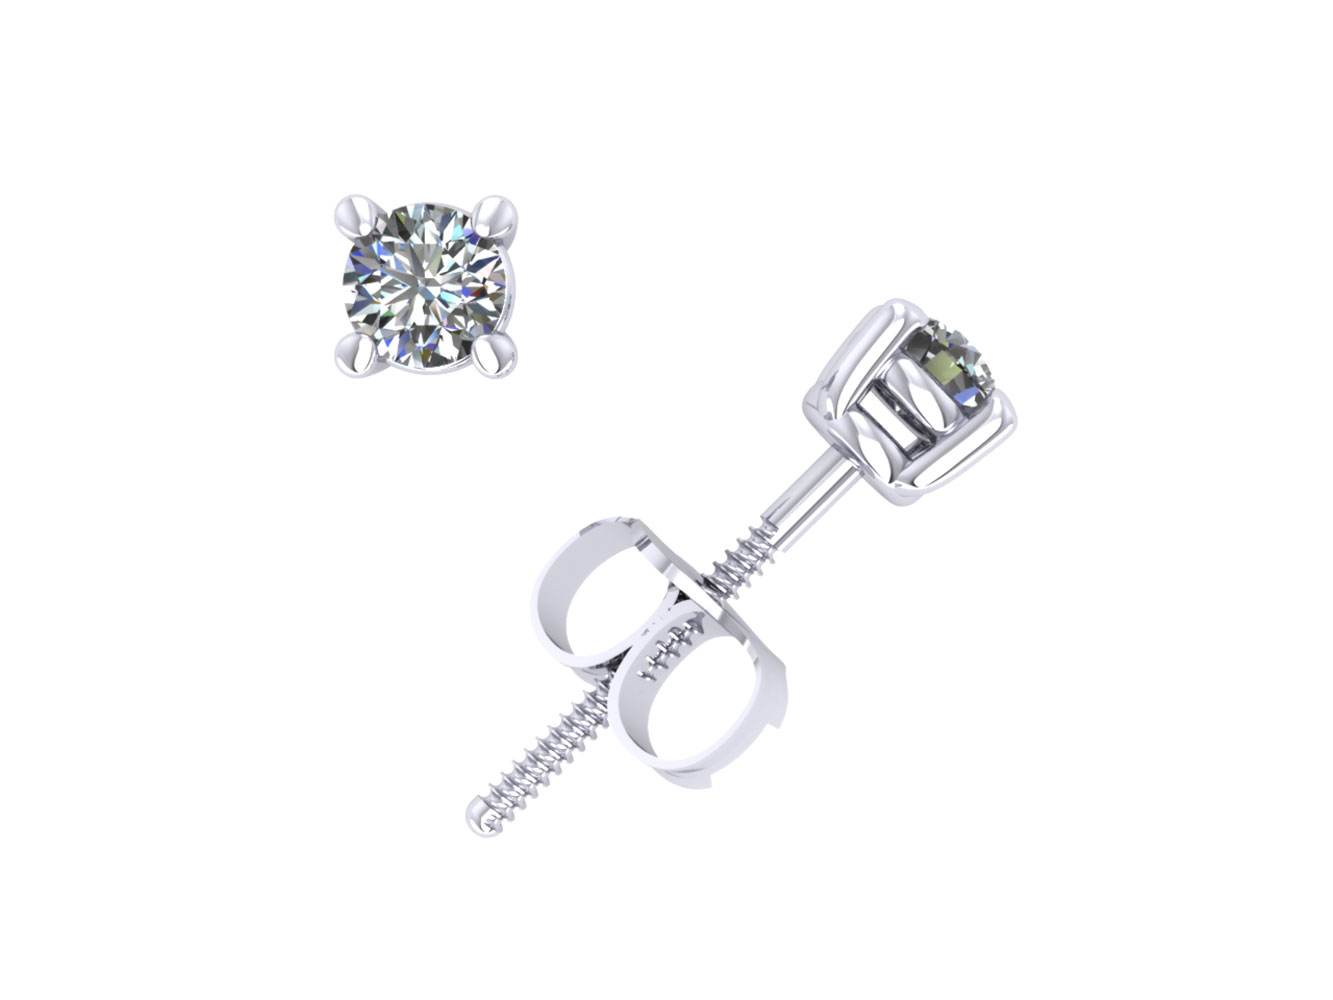 Jewel We Sell 1/4CT Round Cut Diamond Basket Solitaire Stud Earrings 14k White or Yellow Gold 4Prong Set I SI2